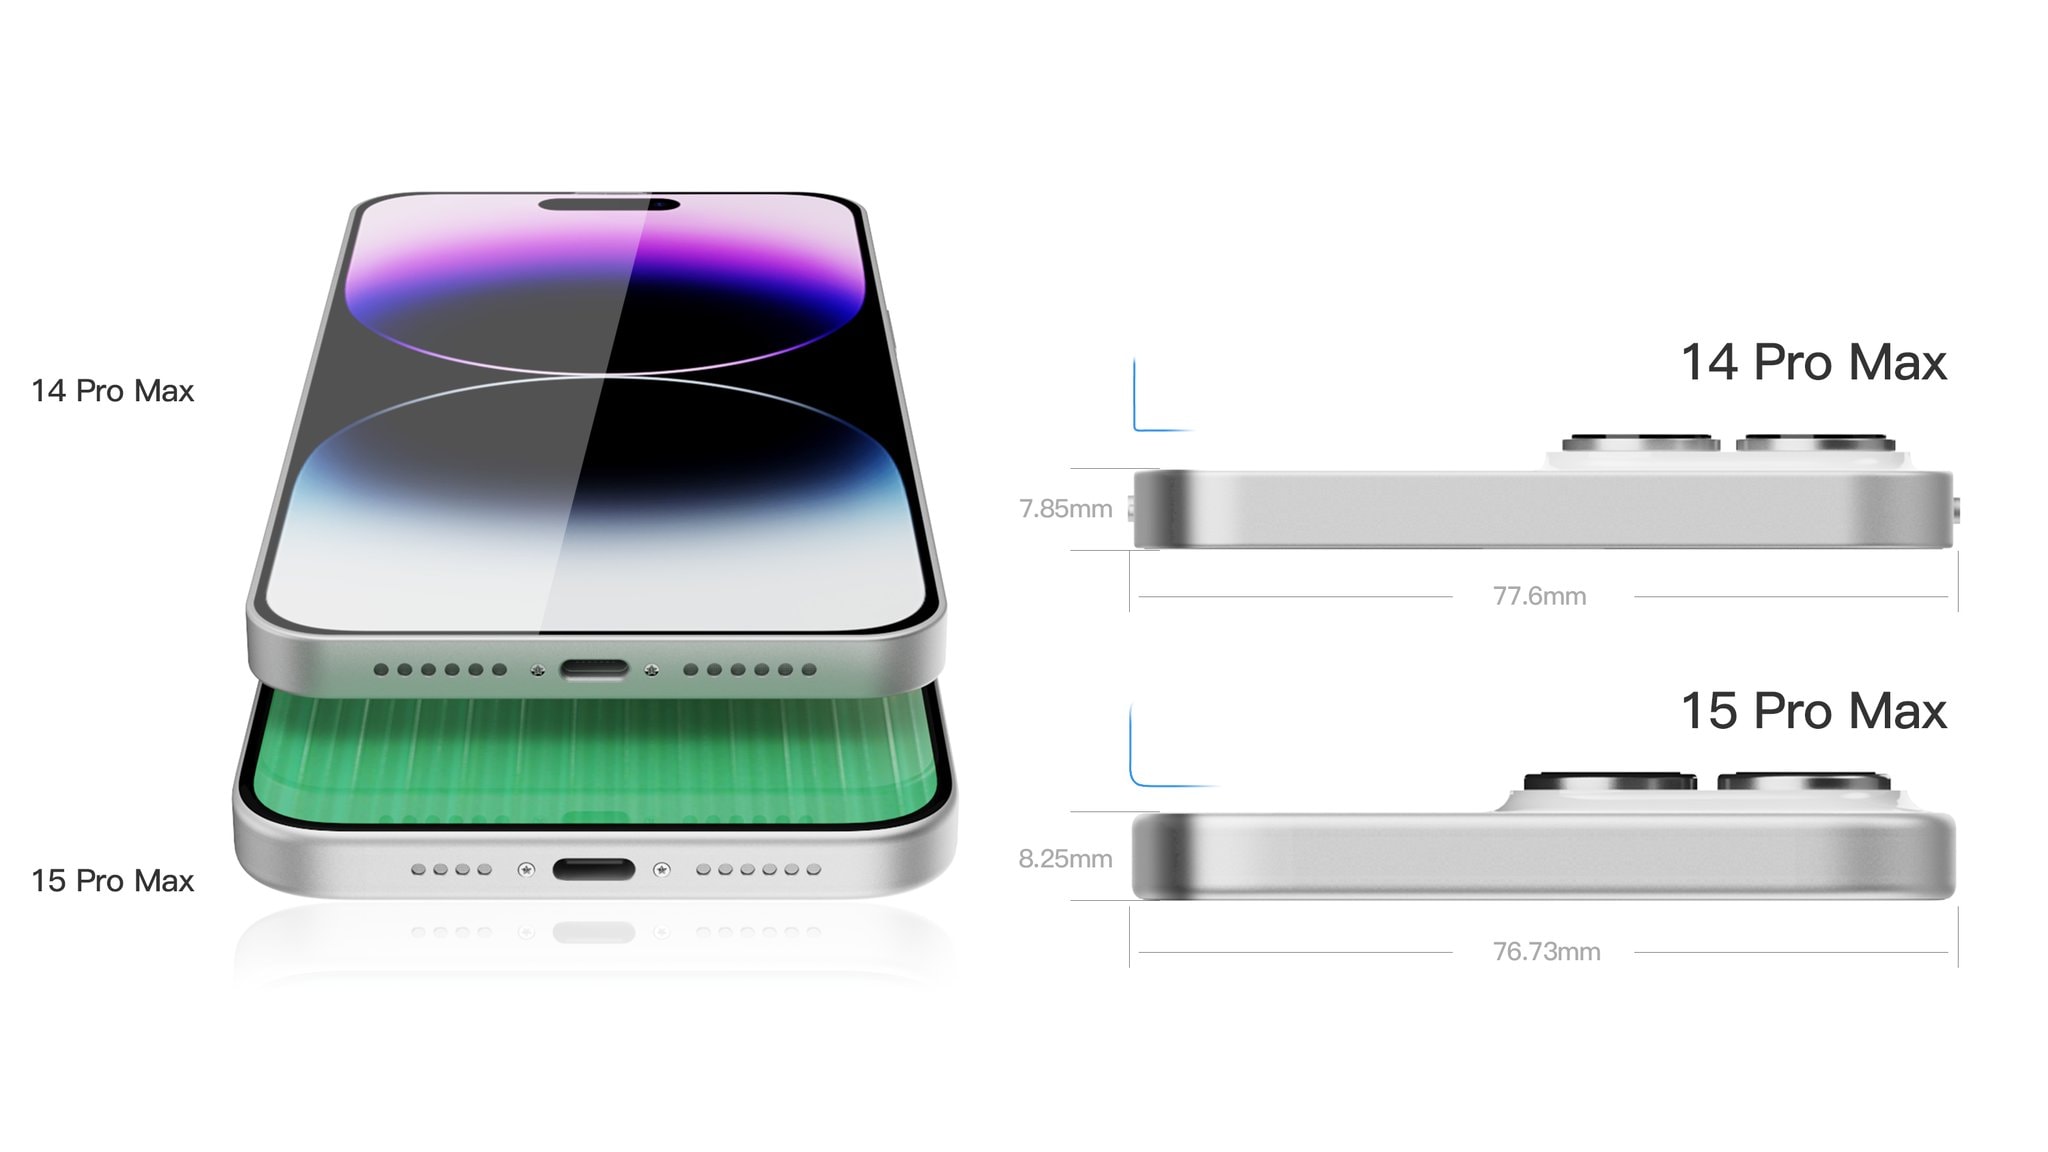 Thickness comparison renders between iPhone 14 Pro Max and iPhone 15 Pro Max